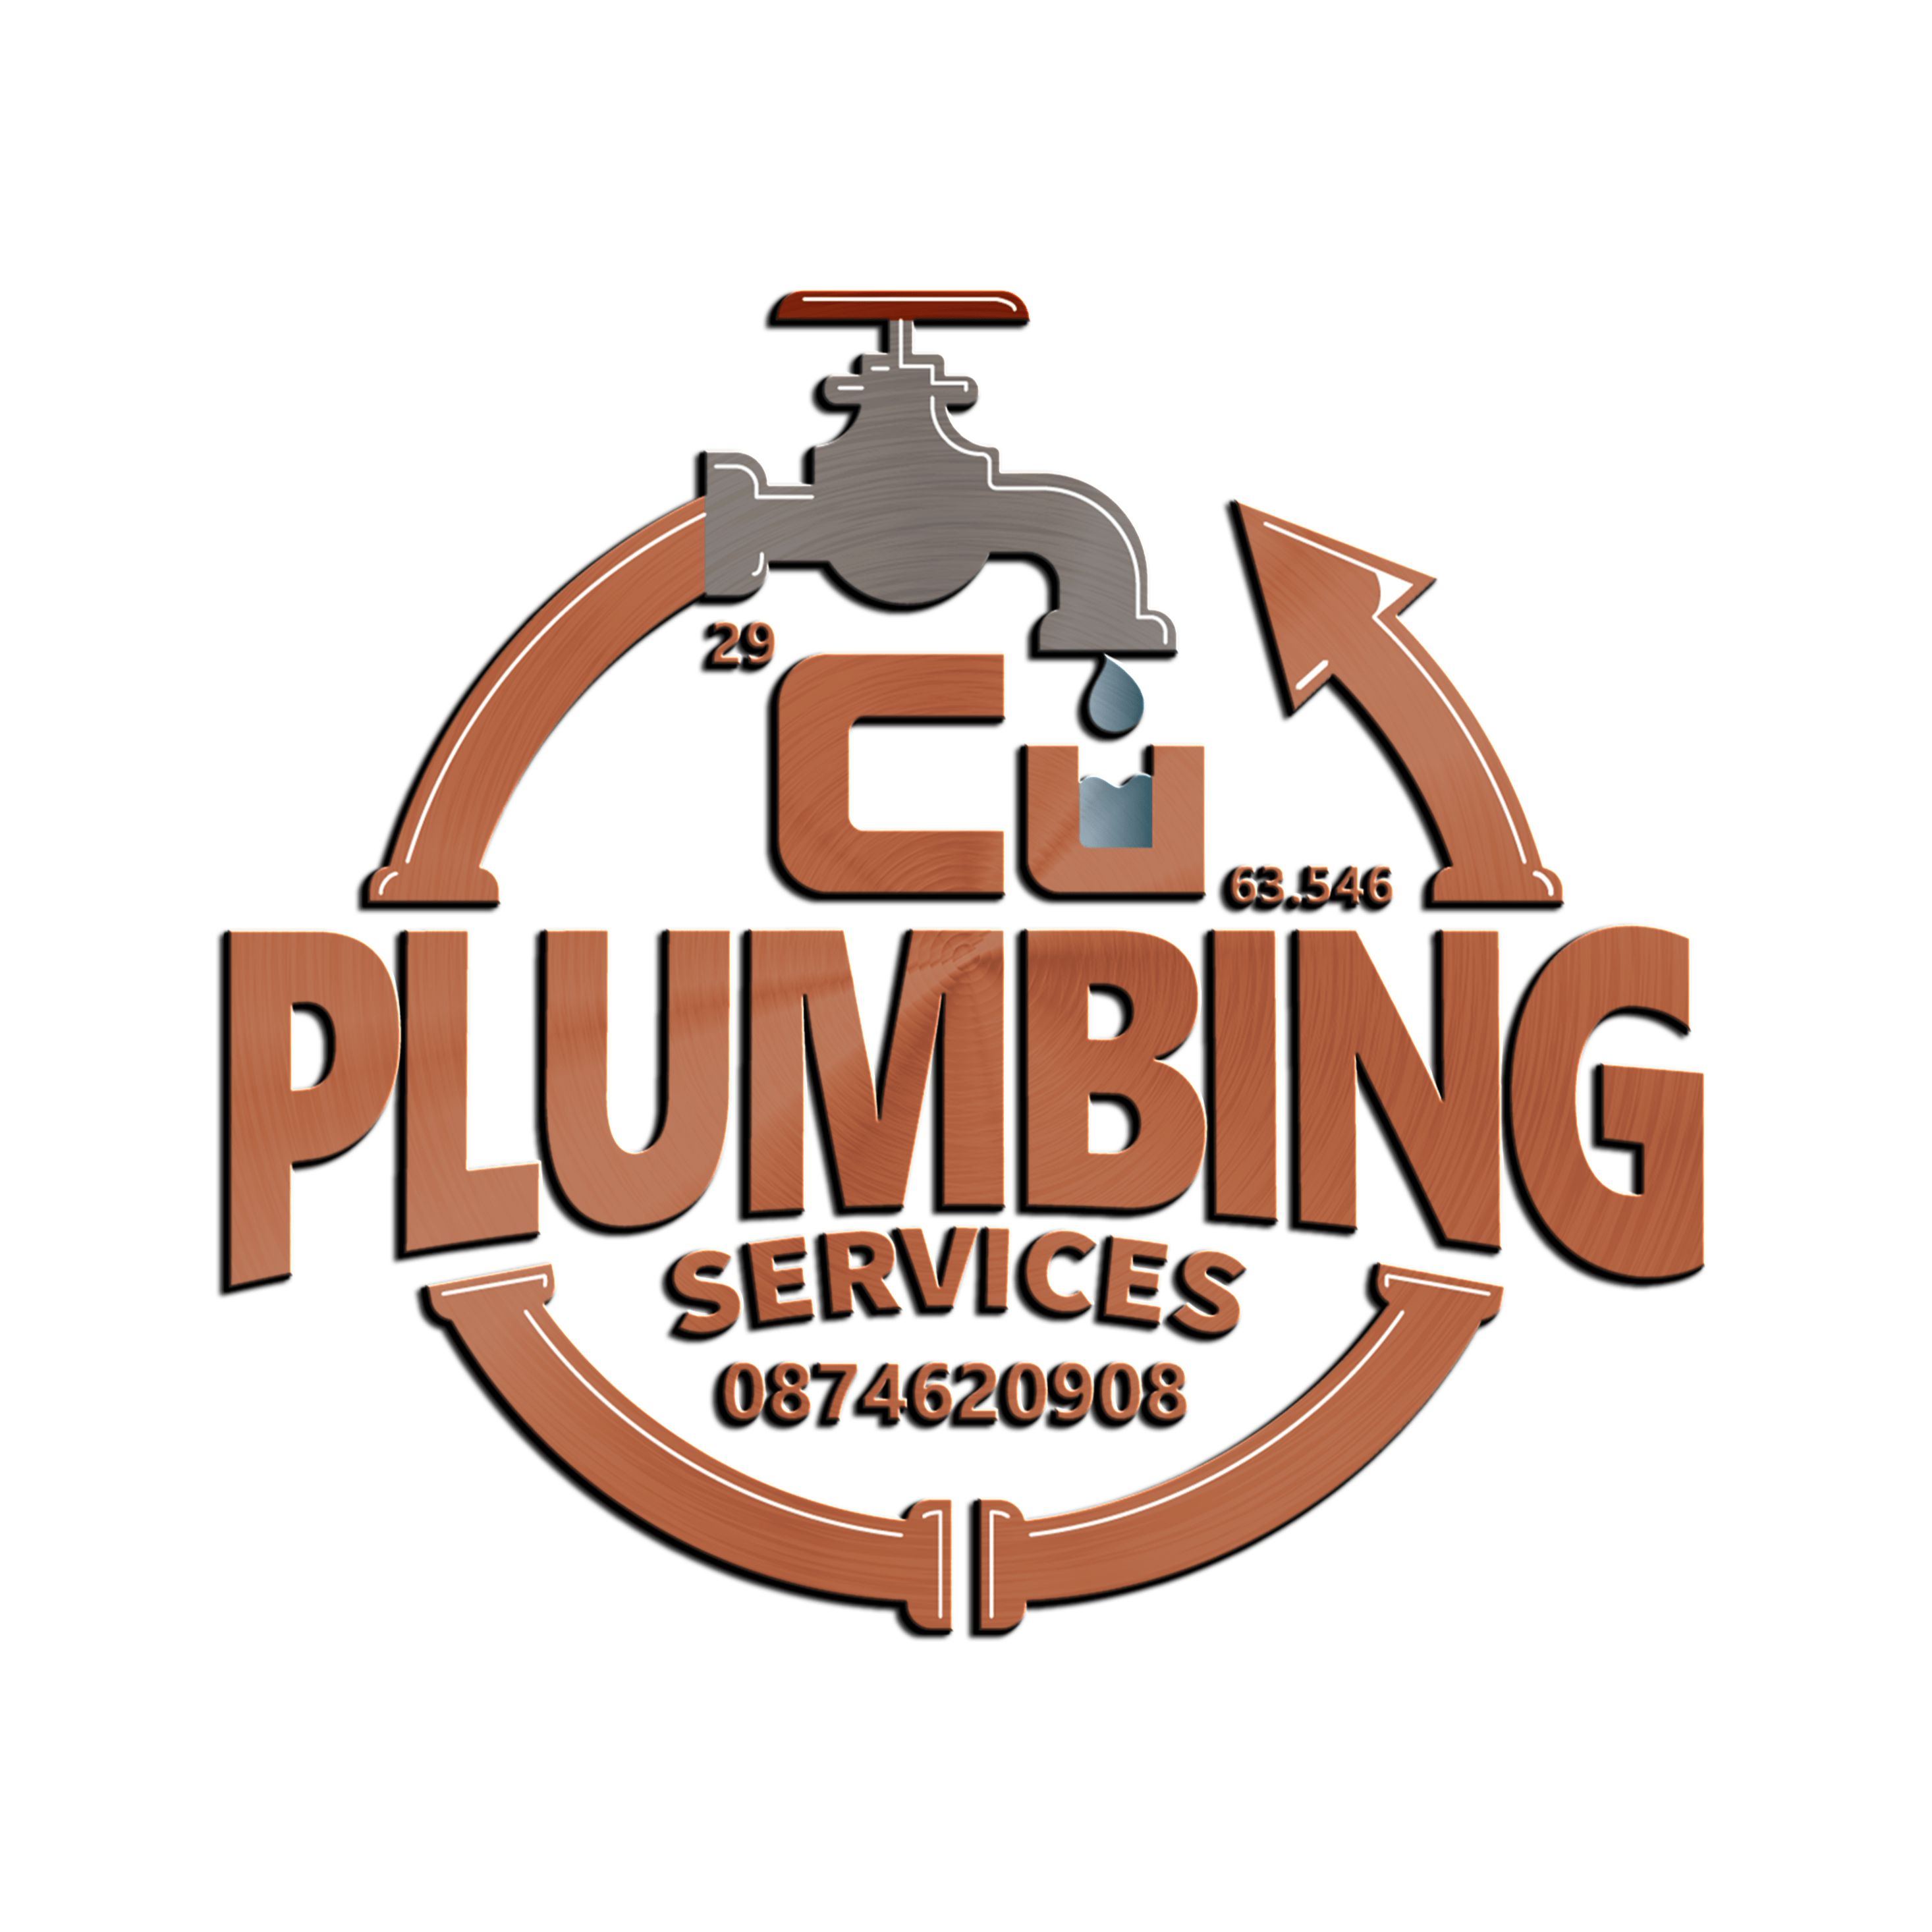 Top Plumber Services in Santry